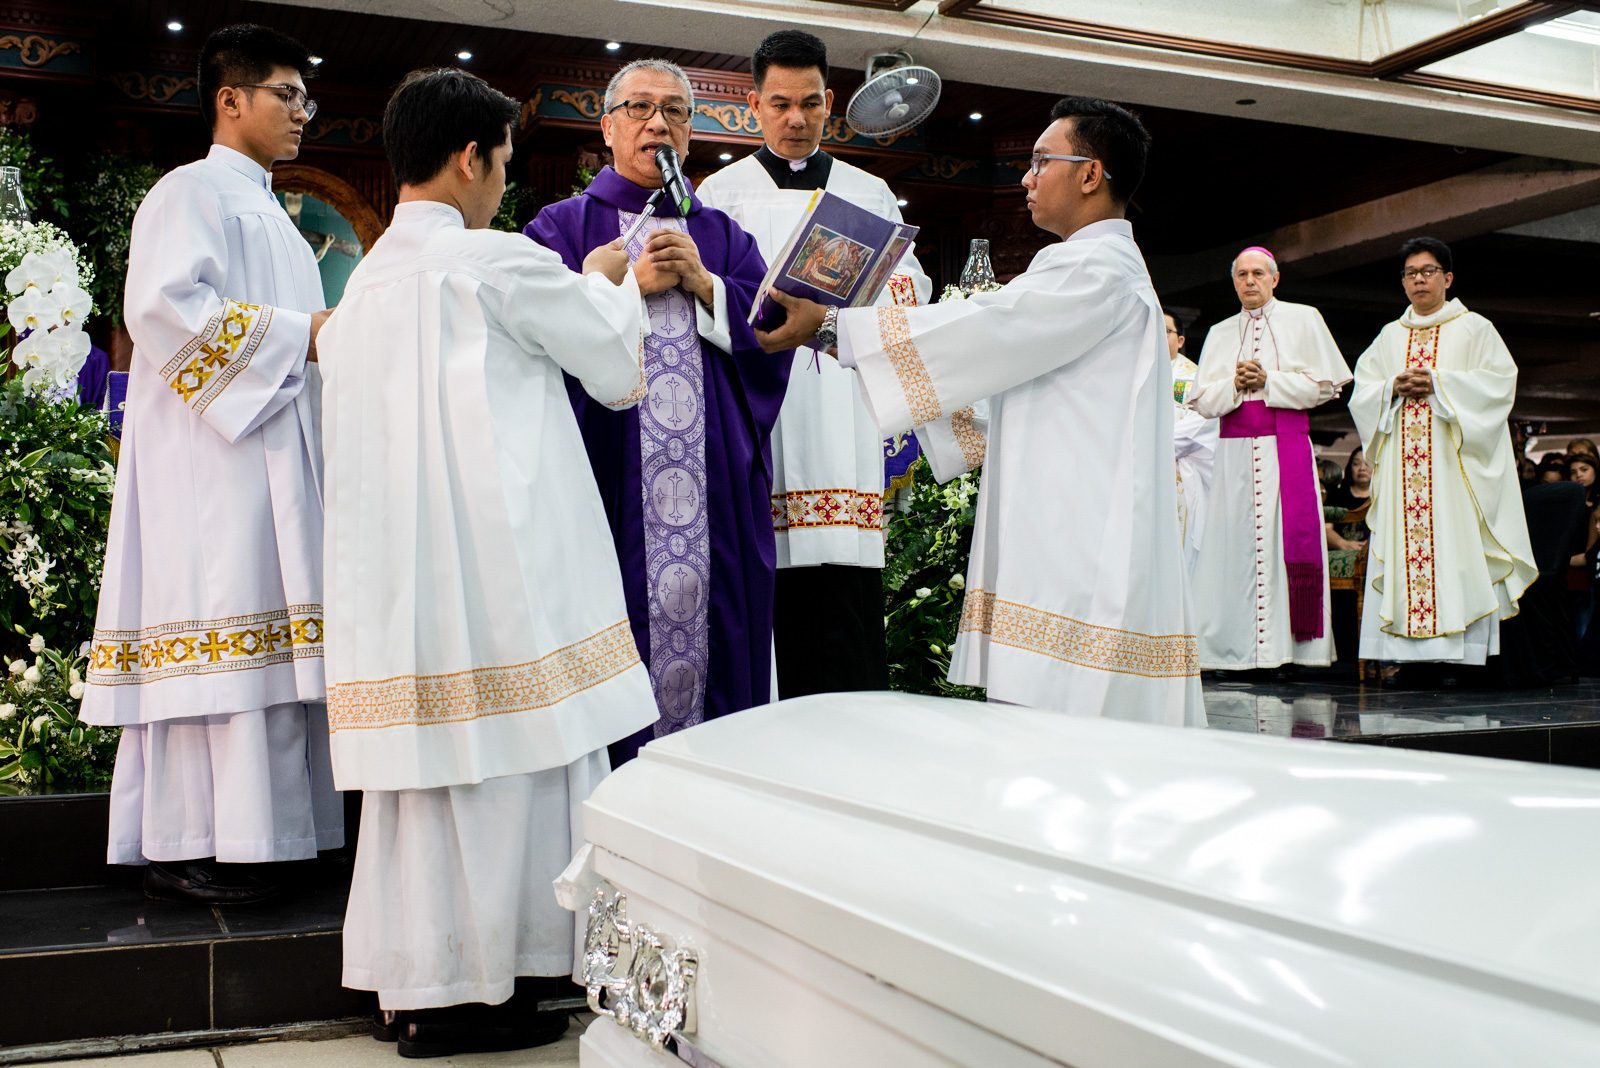 Duterte vows justice for Fr Nilo in call to Cabanatuan bishop